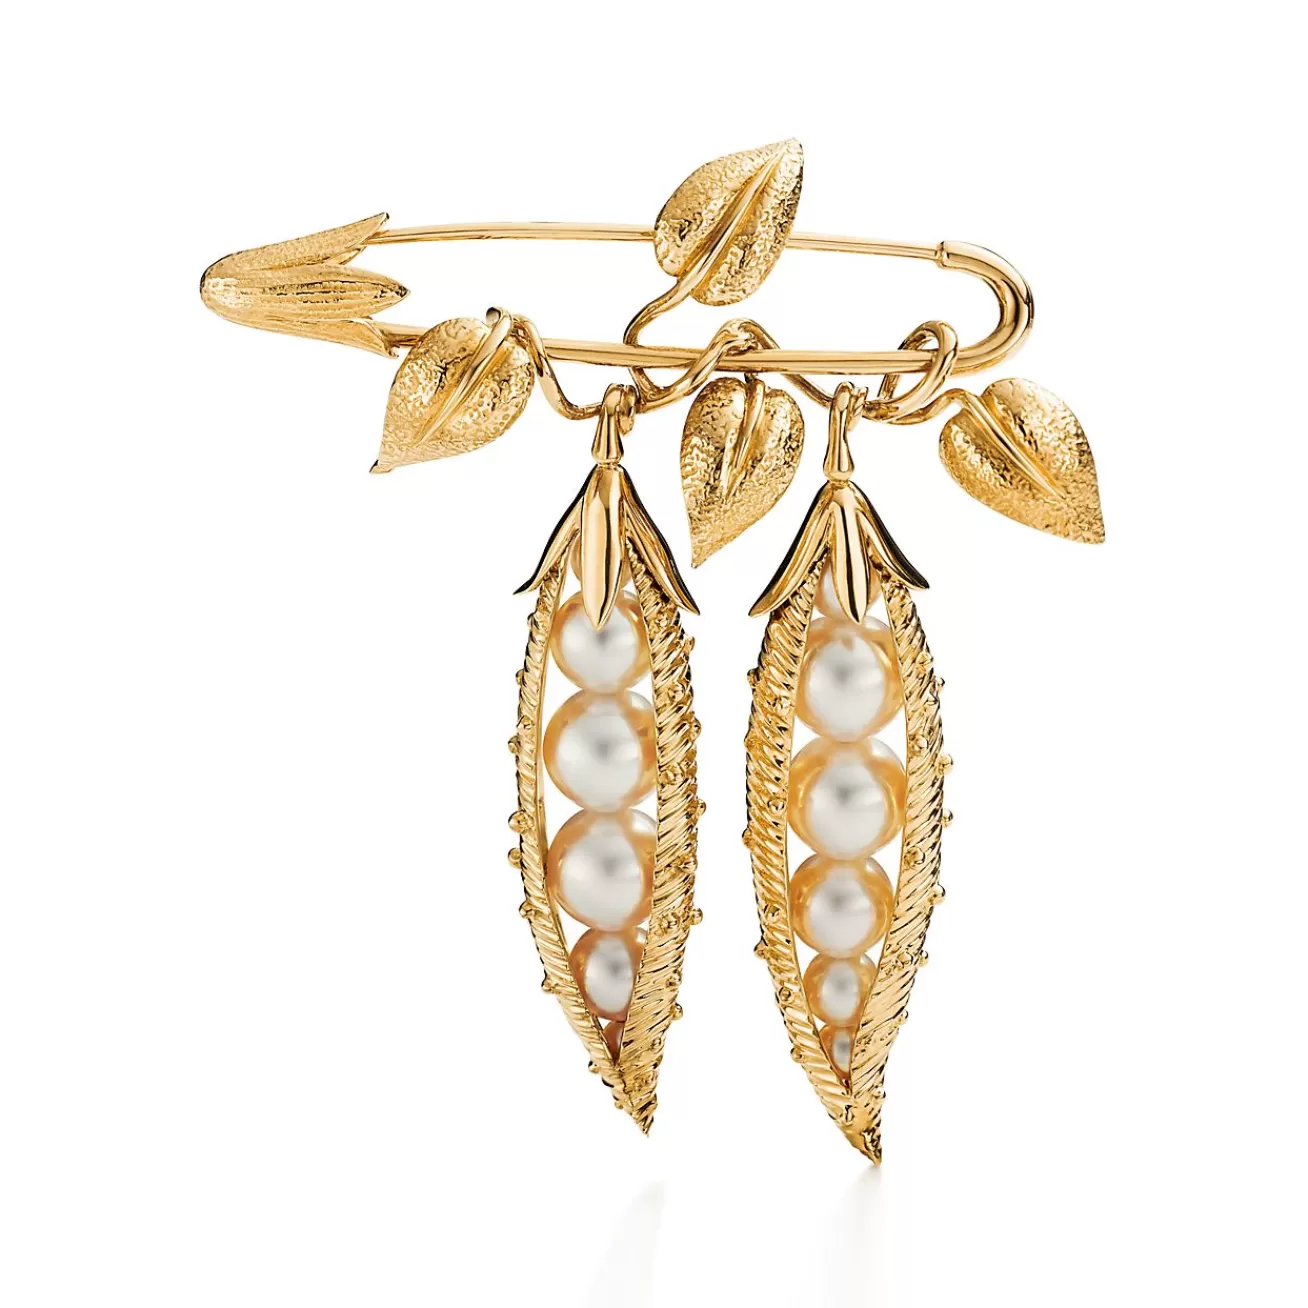 Tiffany & Co. Schlumberger® Peapod Brooch in Yellow Gold with Cultured Pearls | ^ Brooches | Gold Jewelry